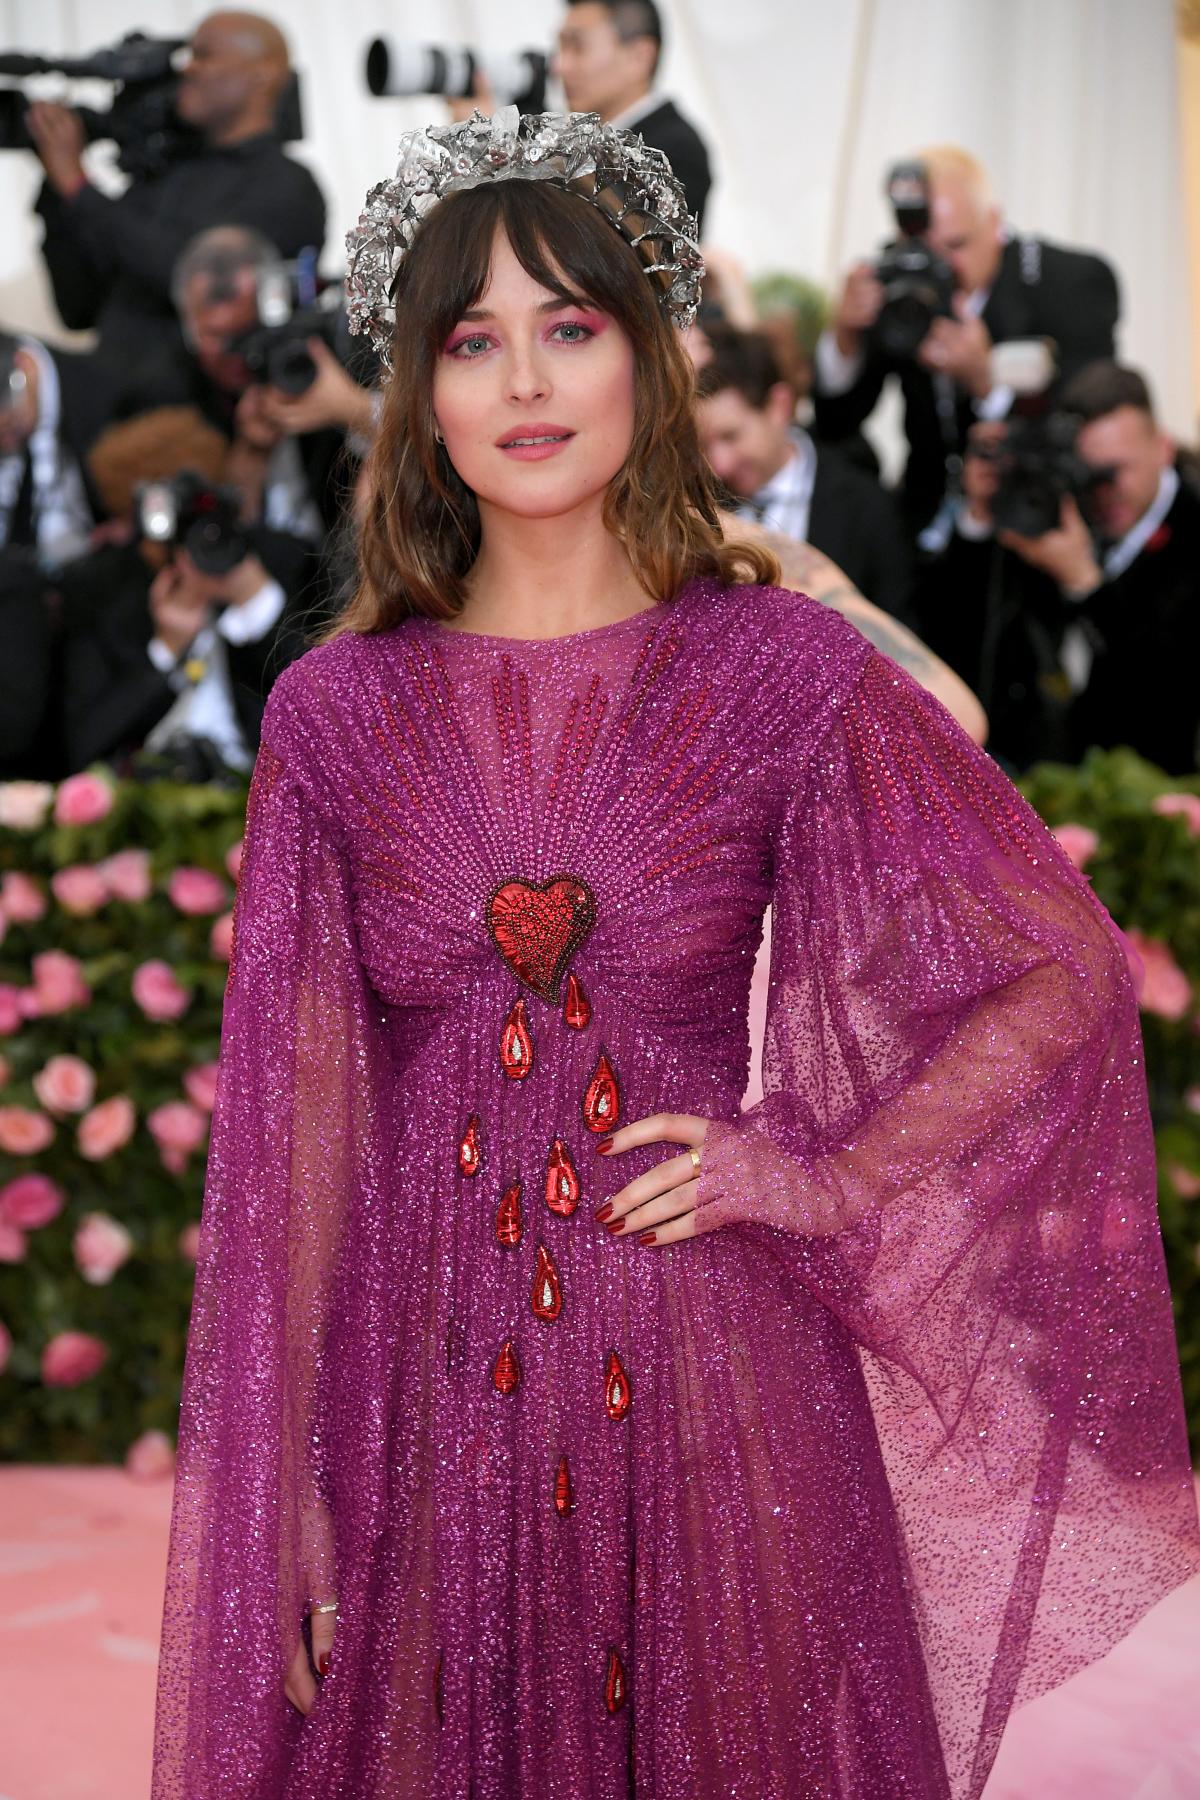 Here's Why Dakota Johnson Is Wearing a Bloody Heart Dress at the